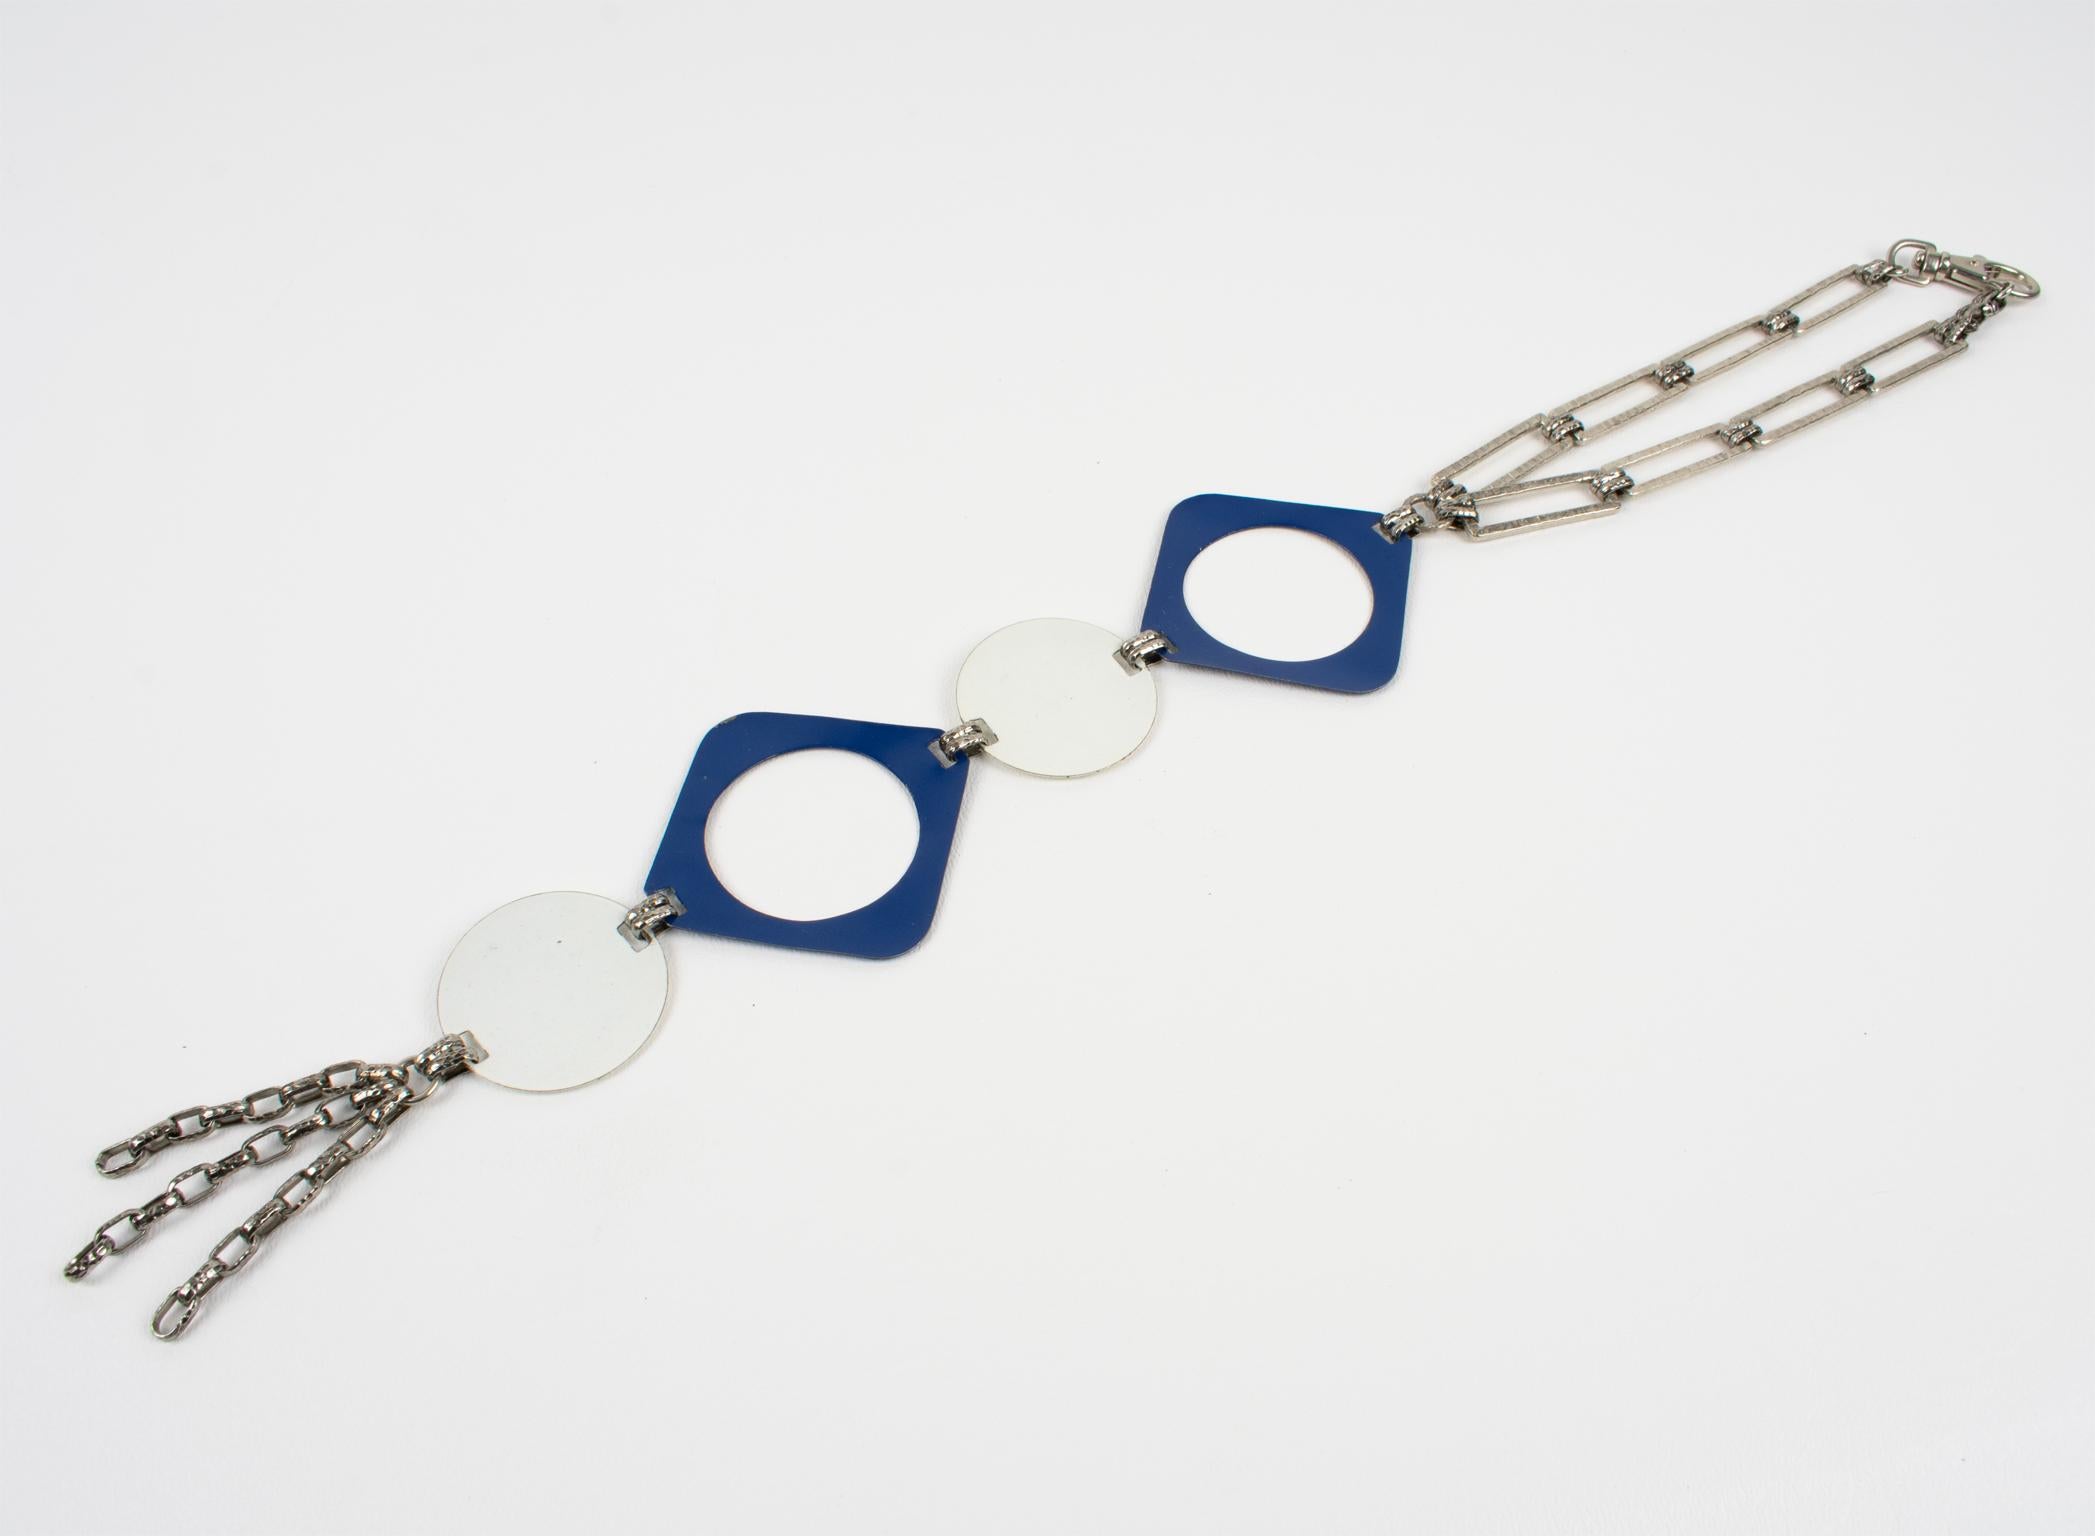 Paco Rabanne Style Space Age Collar Necklace with Blue and White Enamel, 1960s For Sale 5